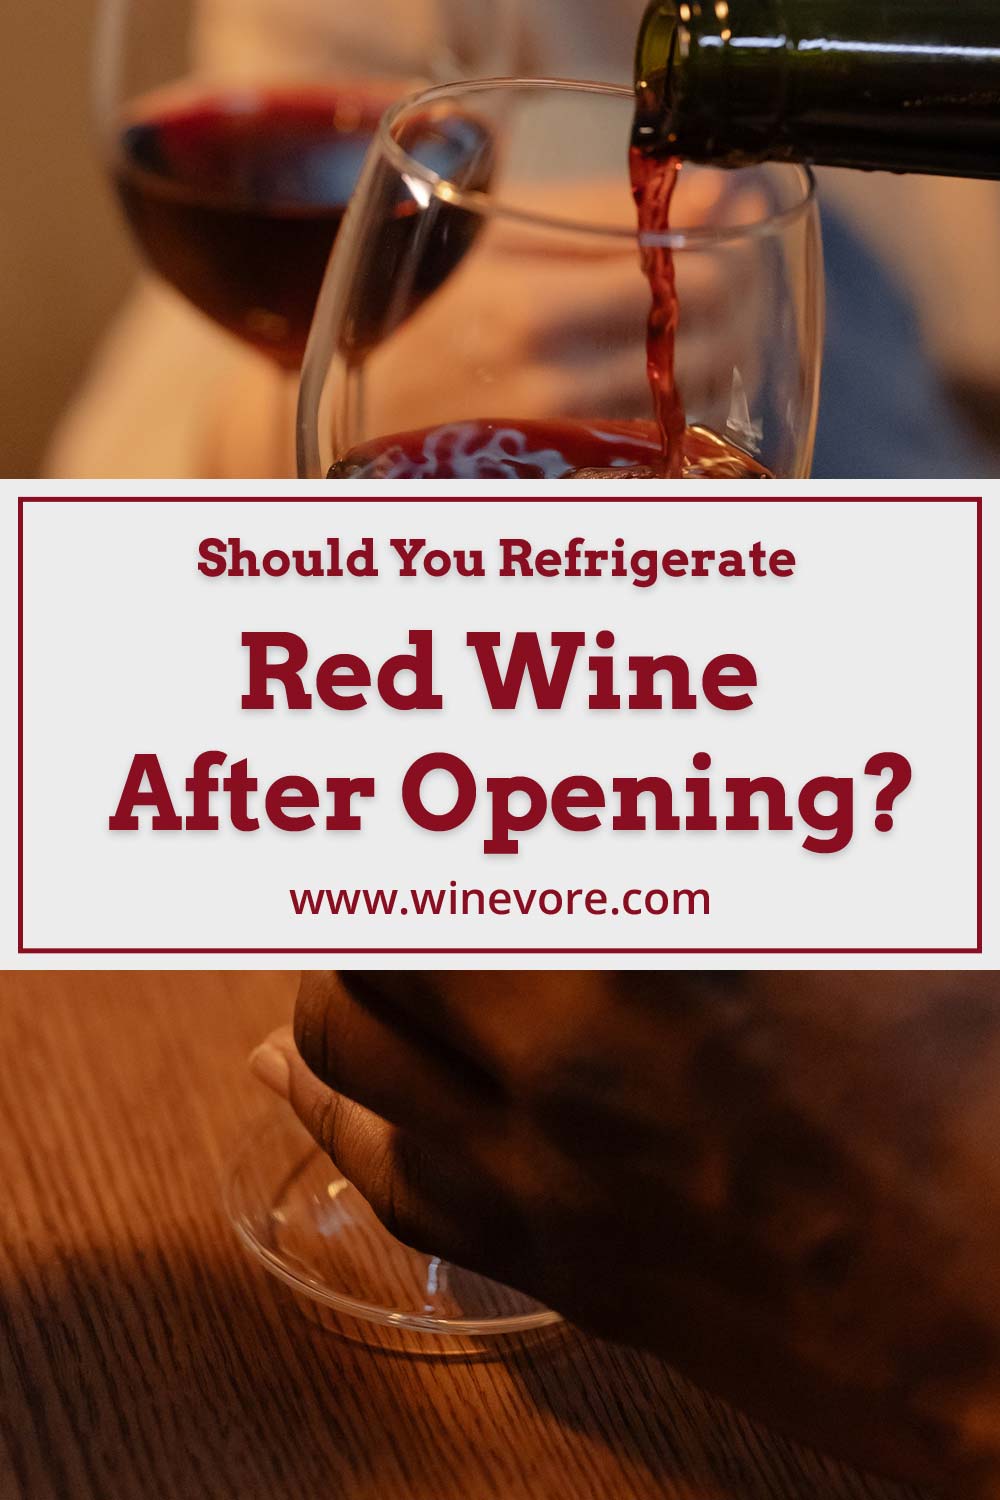 Pouring red wine while holding the glass with hand - should you refrigerate it after opening the bottle?